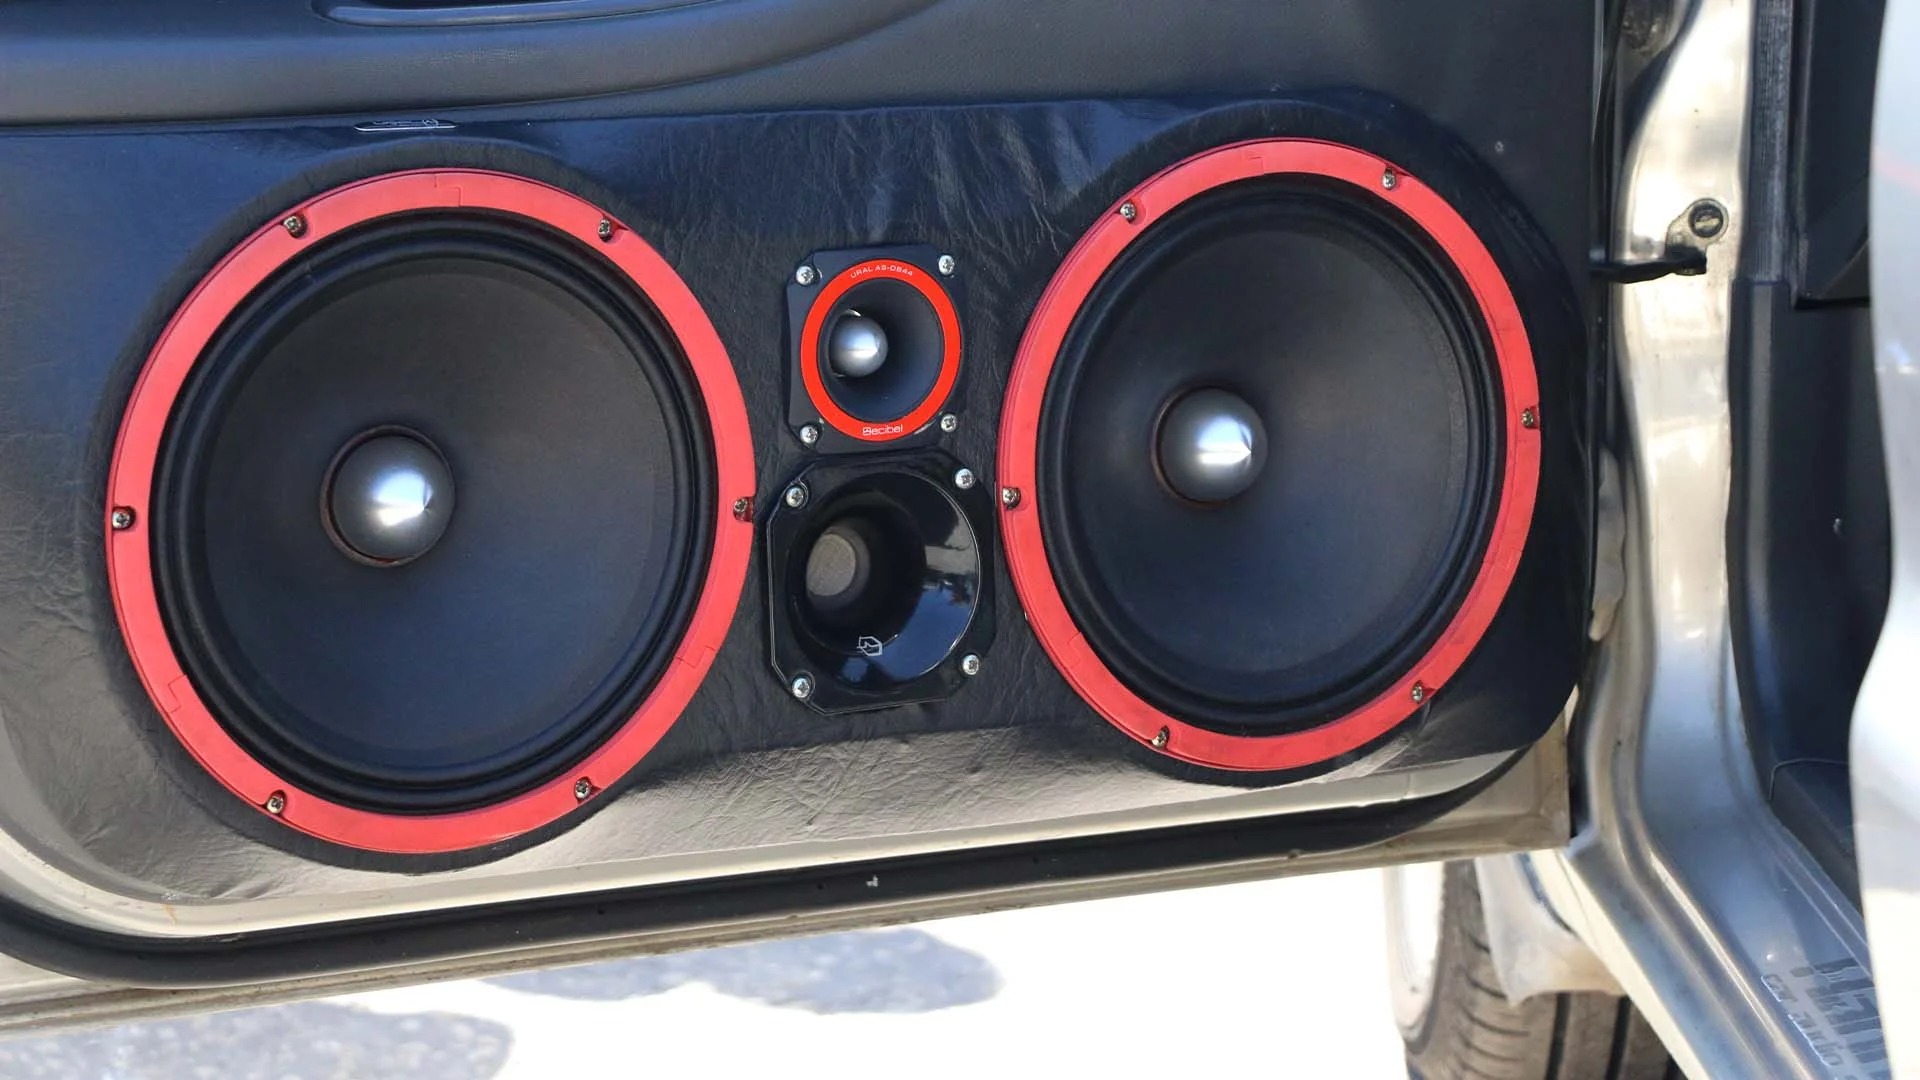 Bass, we need bass! The sound system in the vehicle!